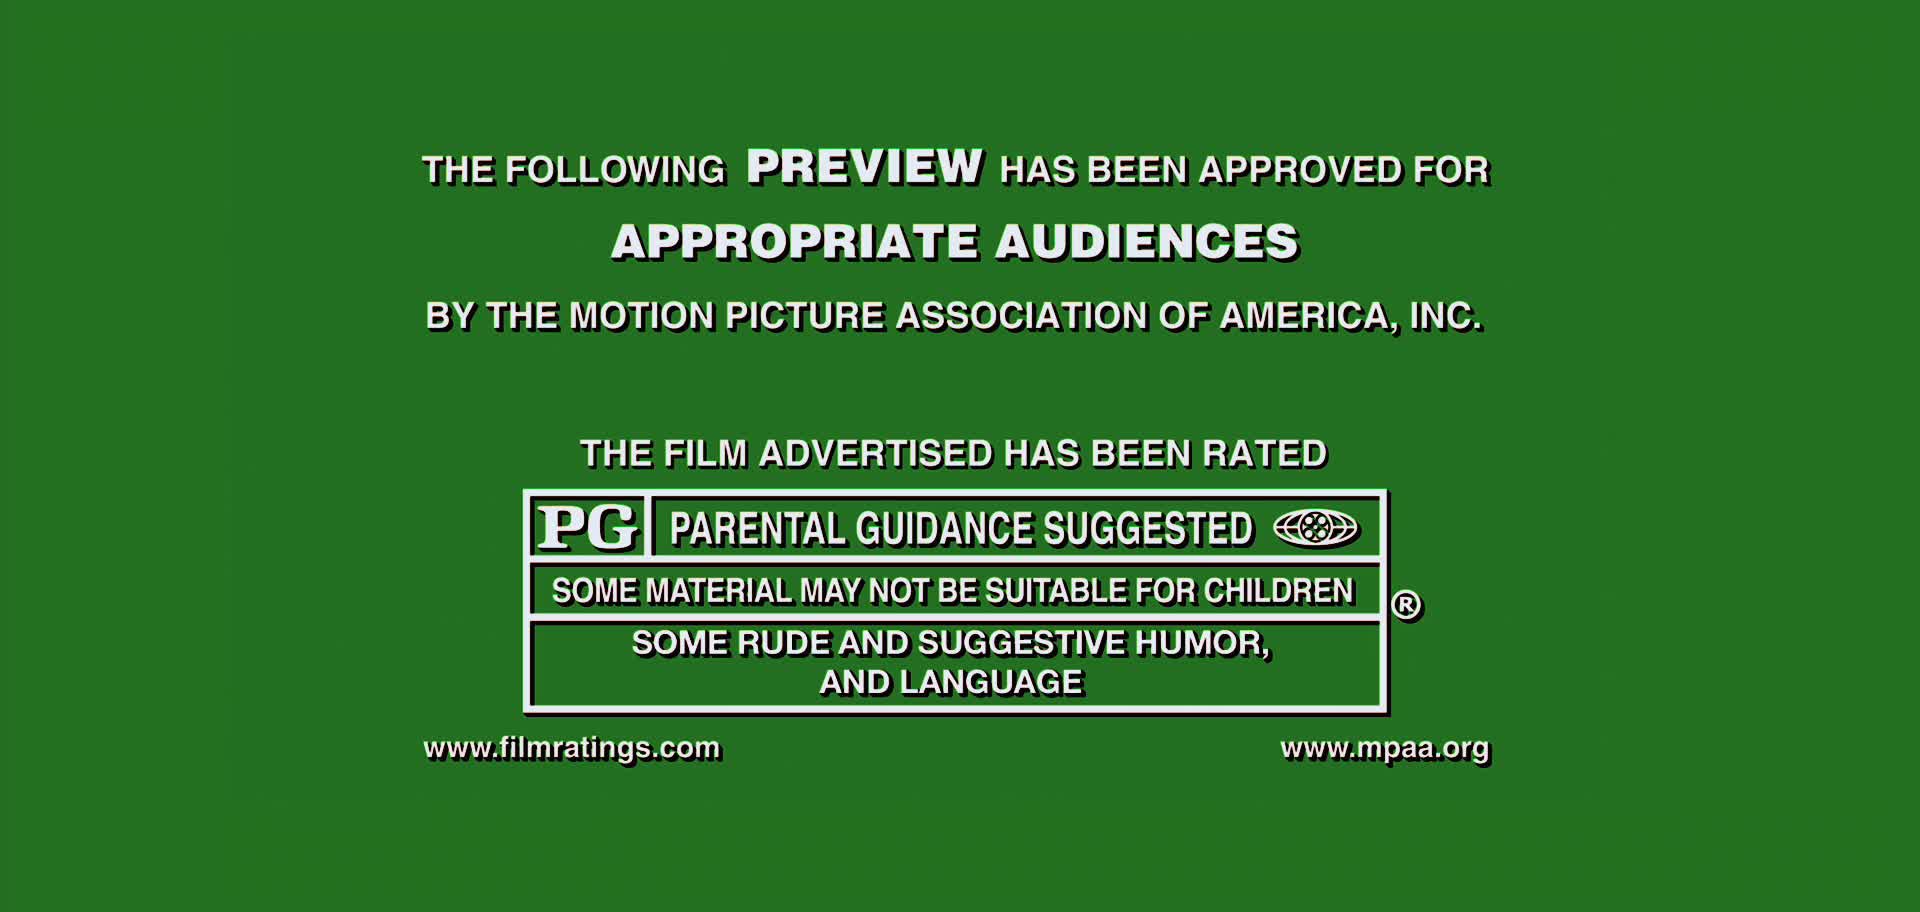 Appropriate audiences. The following Preview has been approved for all audiences. G MPAA. MPAA R. The following Preview has been approved for all audiences by the Motion picture Association of America Inc.